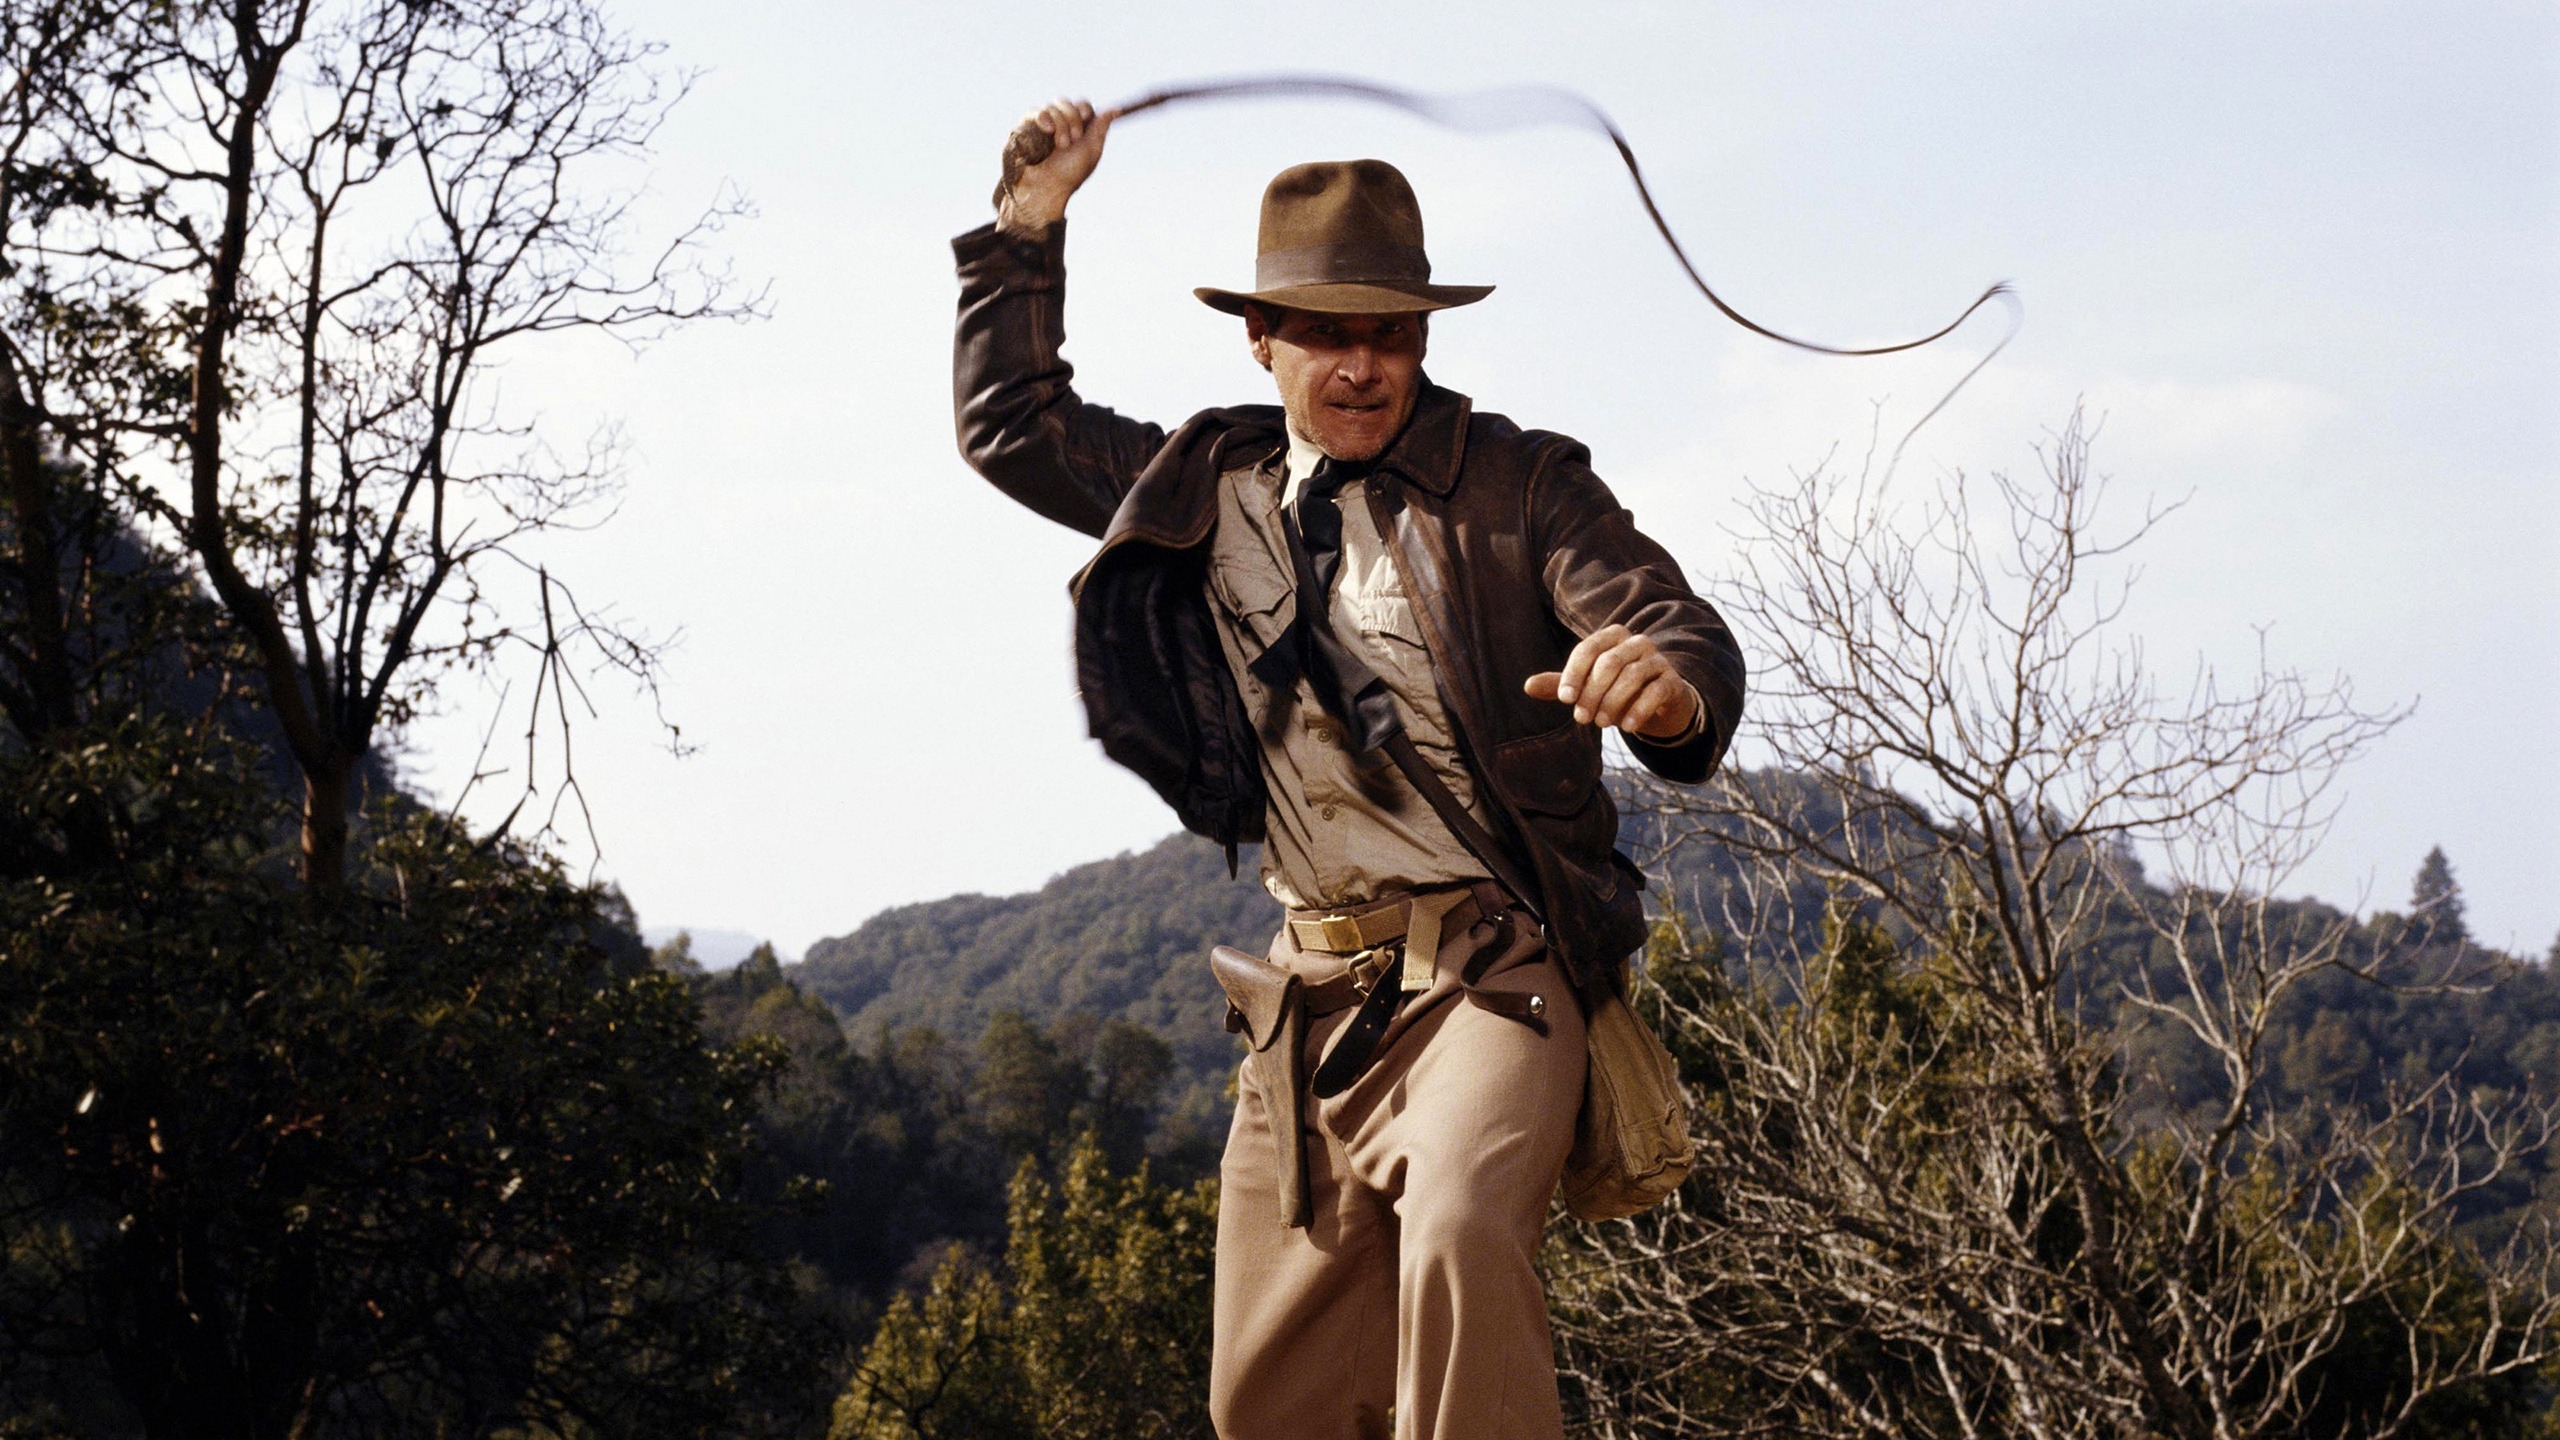 Harrison Ford as Indiana Jones for 2560x1440 HDTV resolution